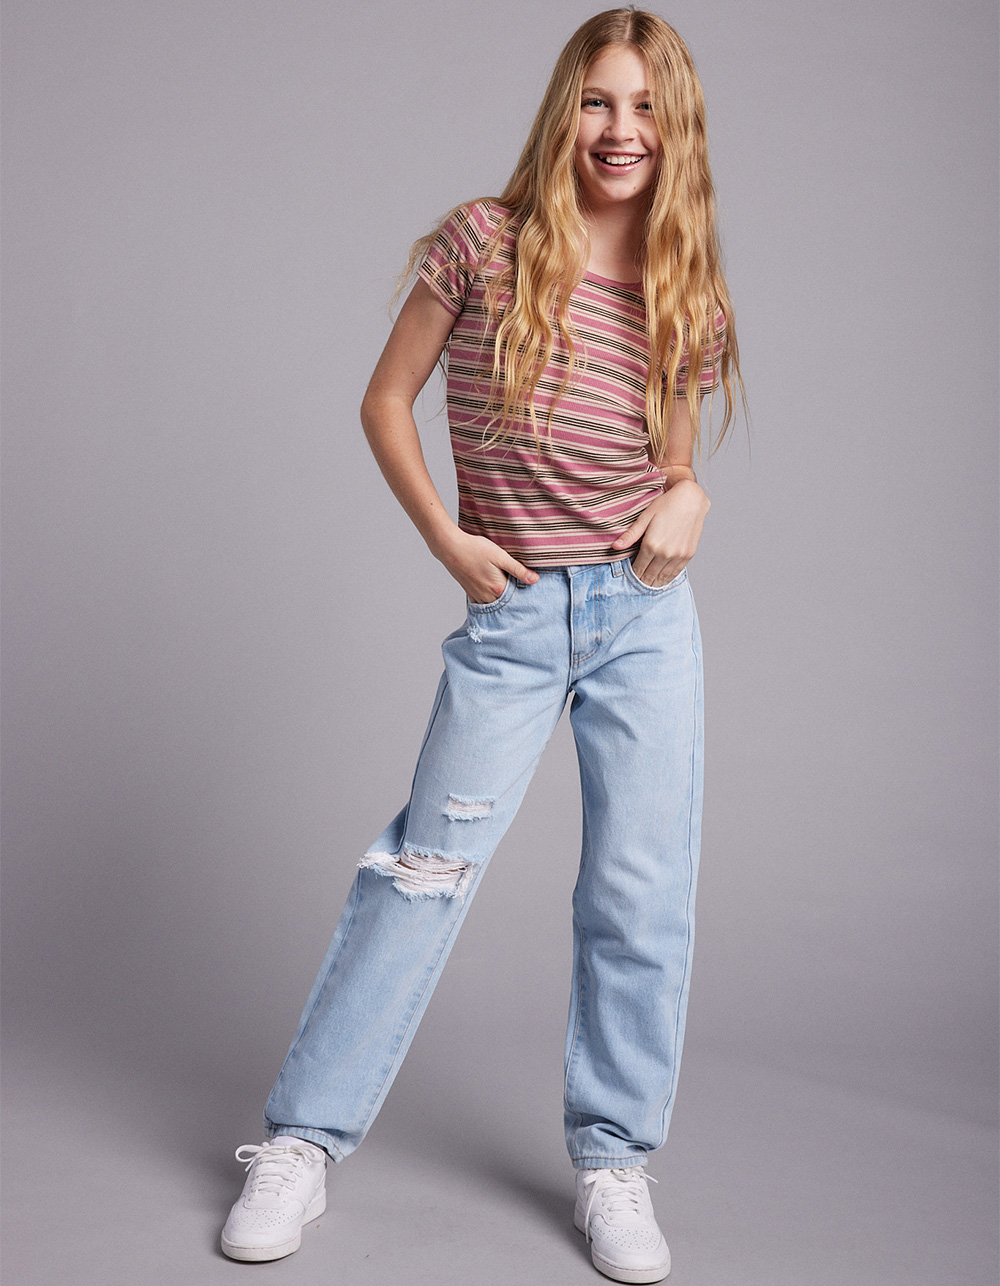 Tilly's: 2 for $55 Girls RSQ Jeans, Graphic Tees